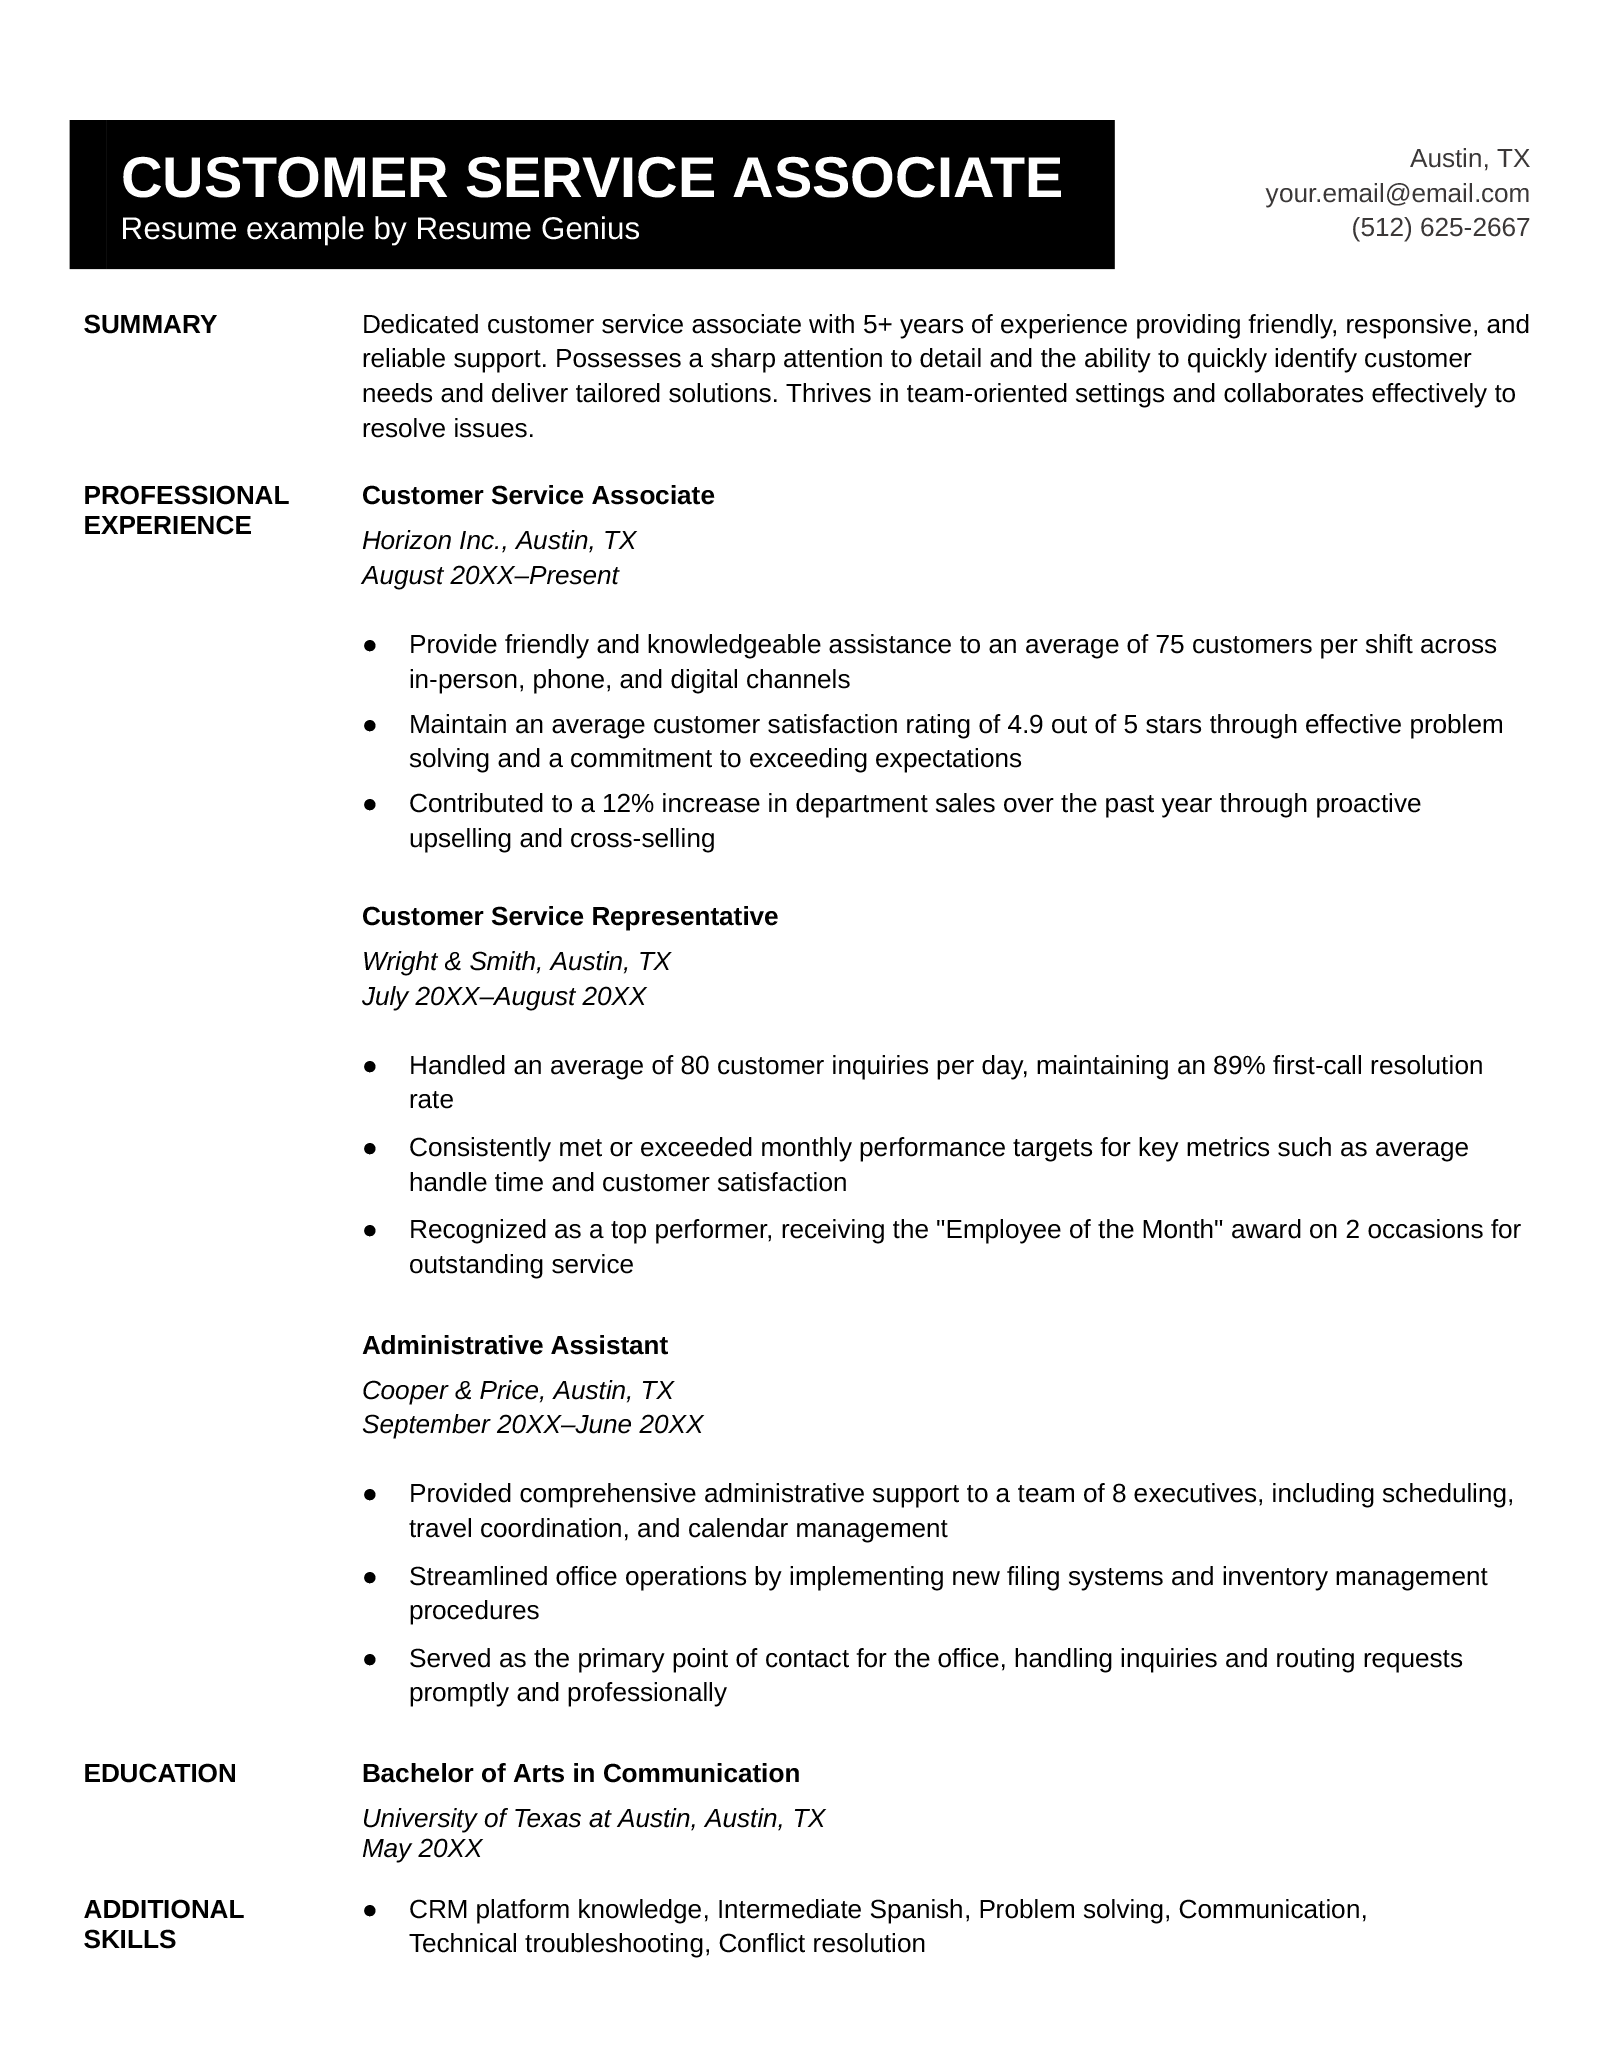 An example resume for a customer service associate. 